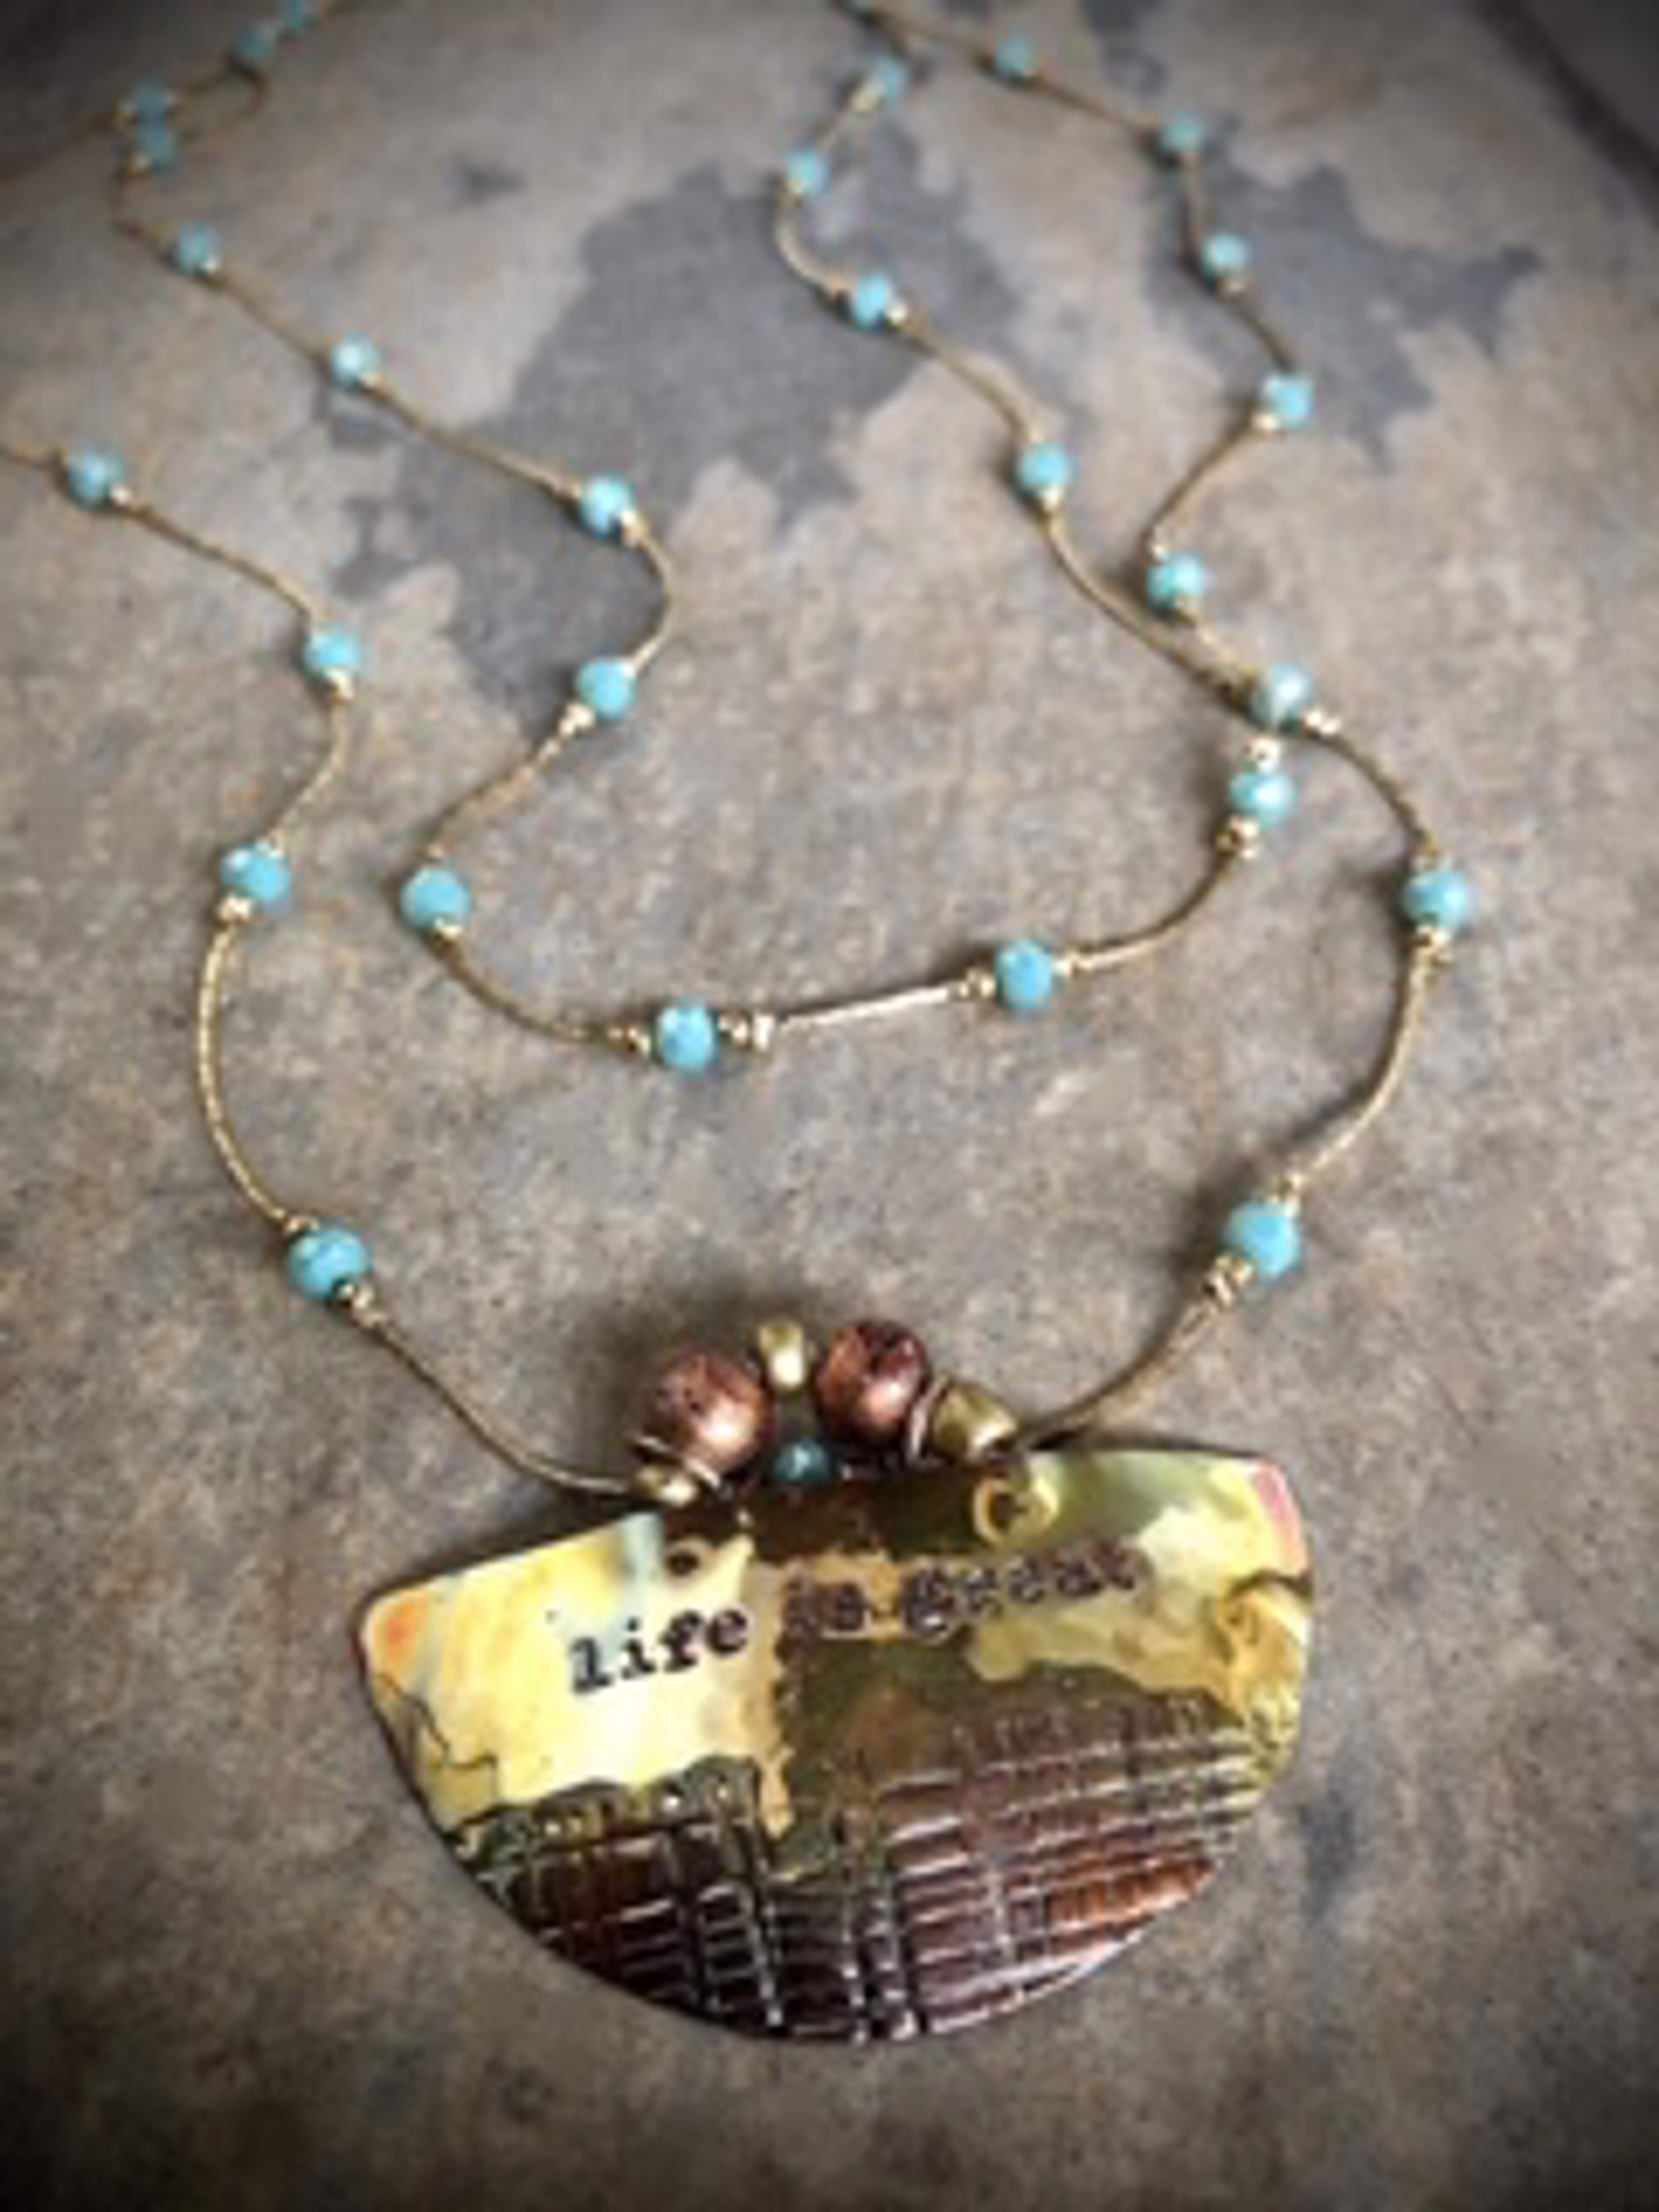 Necklace - "Life Is Great" 2 Strand Copper & Pearl Chain 16" - #2019 by Vesta Abel